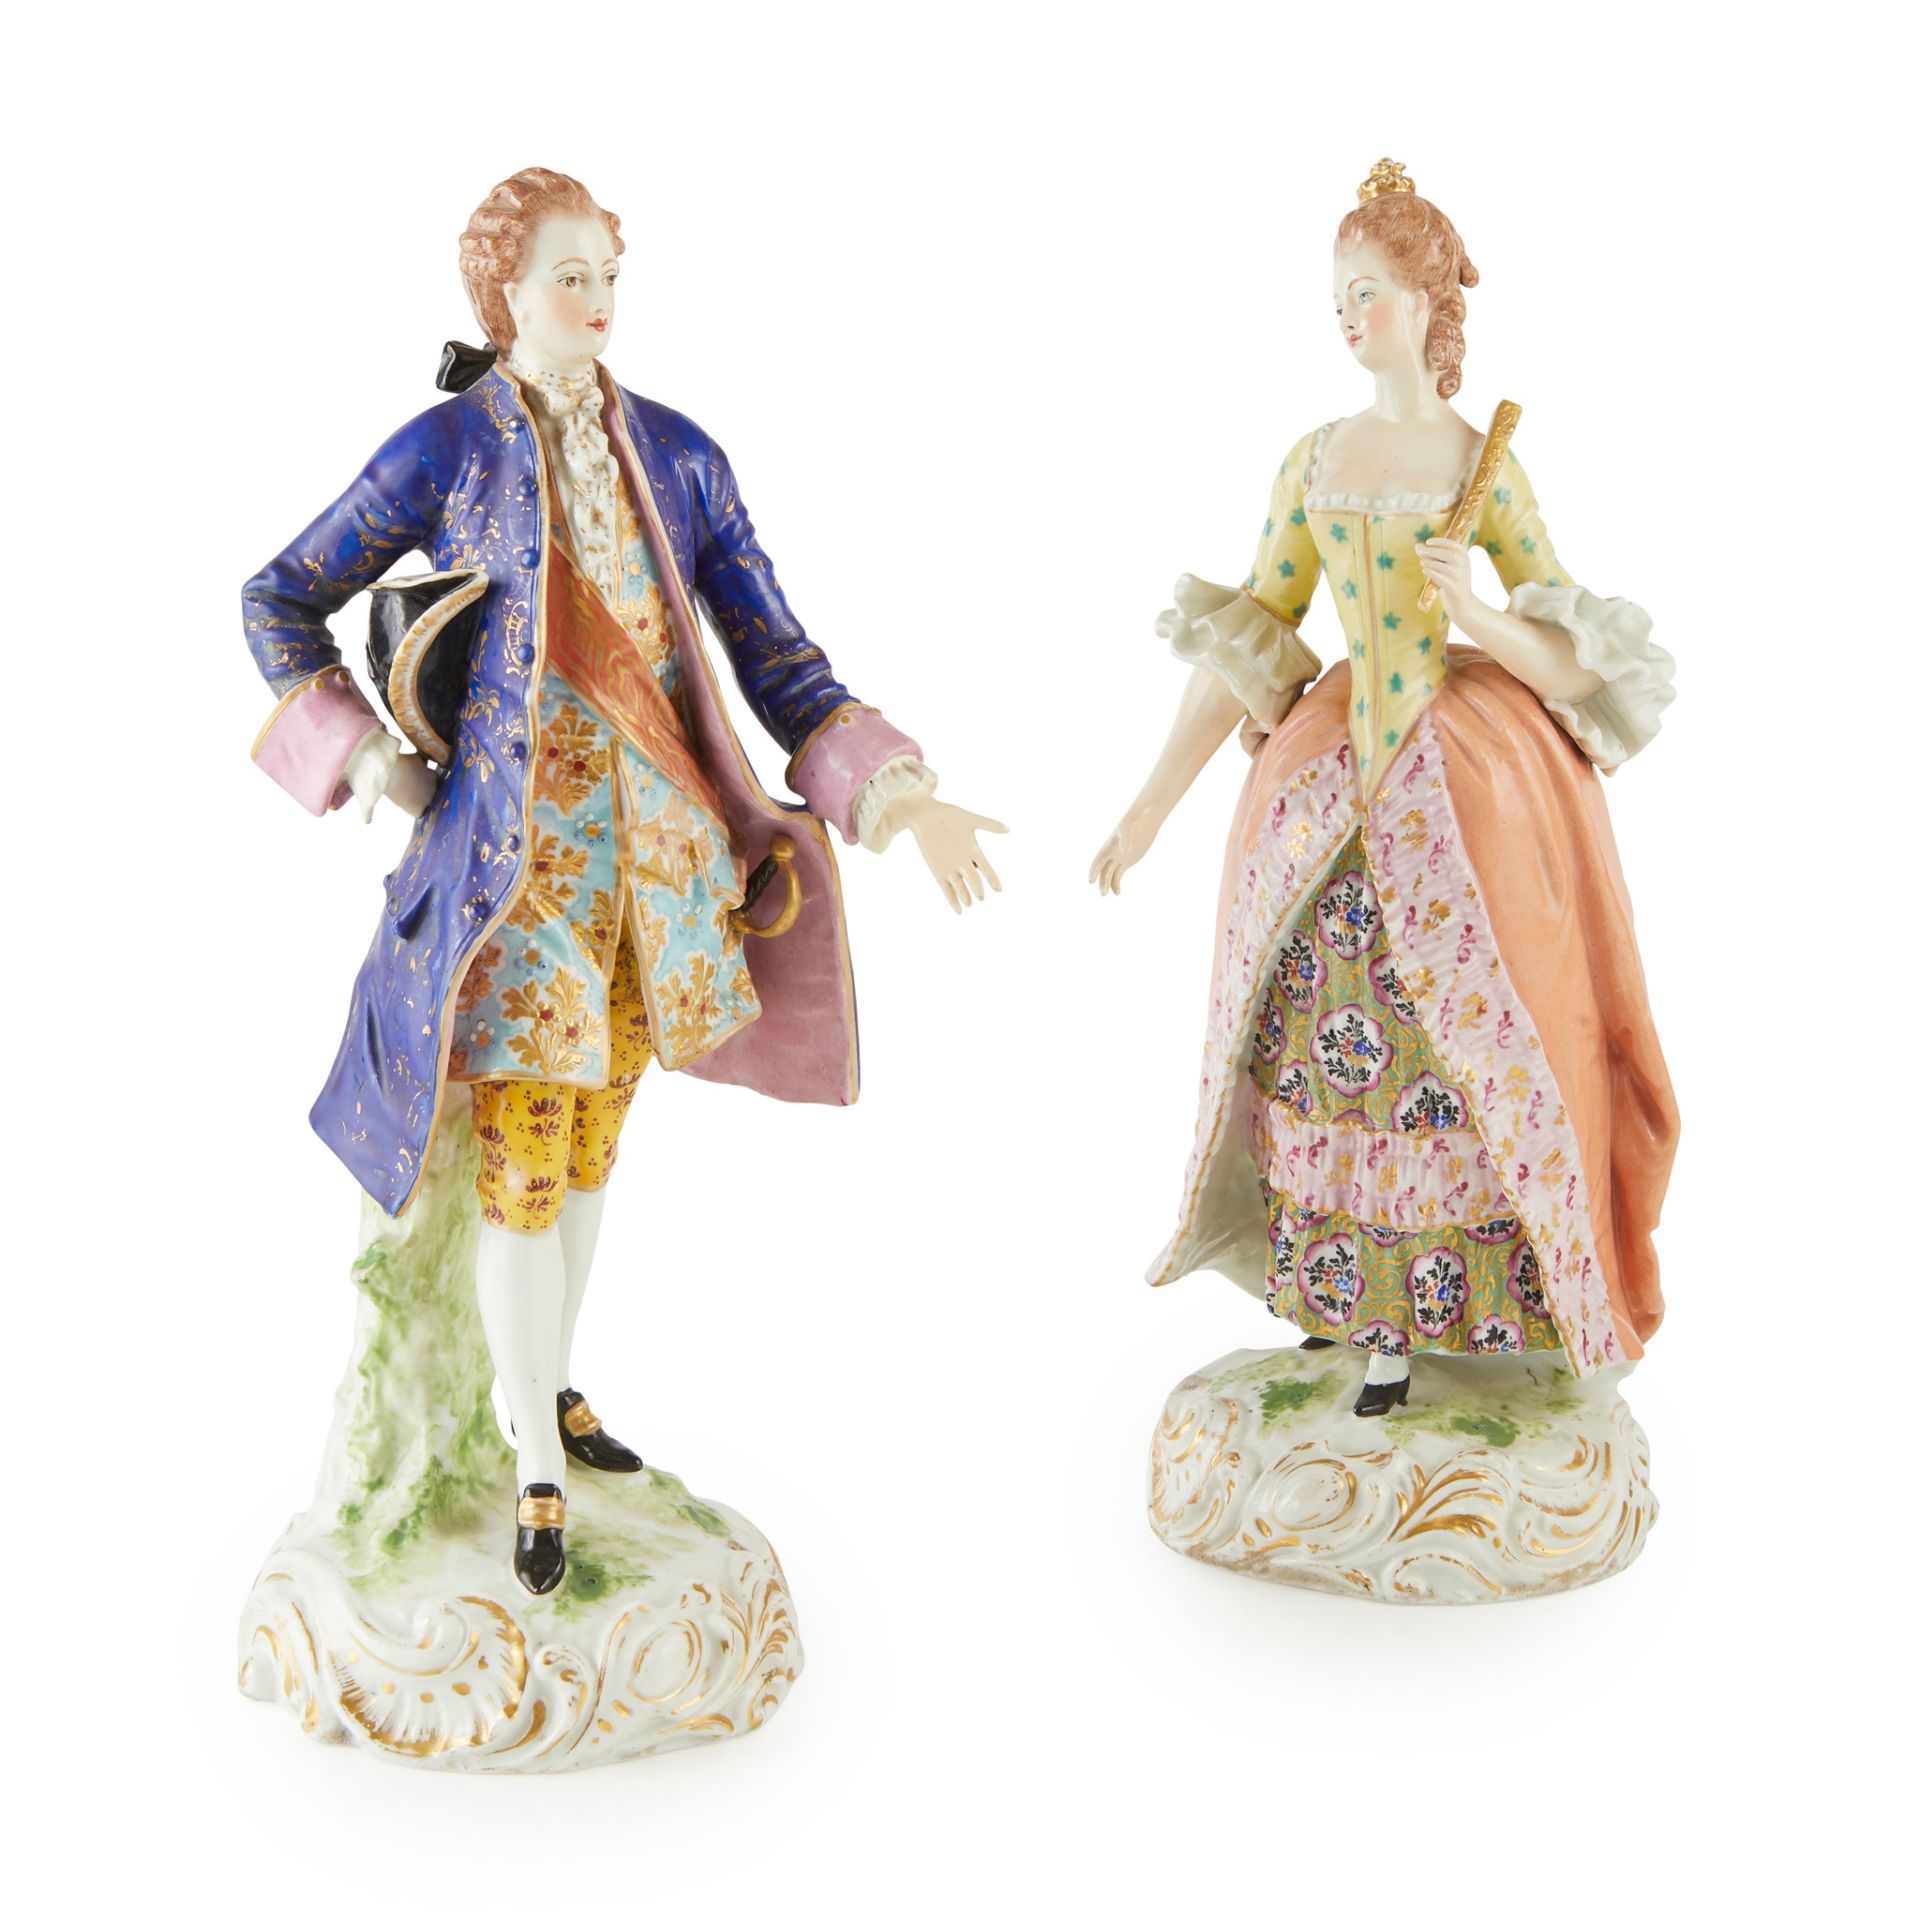 PAIR OF LARGE SAMSON DERBY PORCELAIN FIGURES LATE 19TH CENTURY